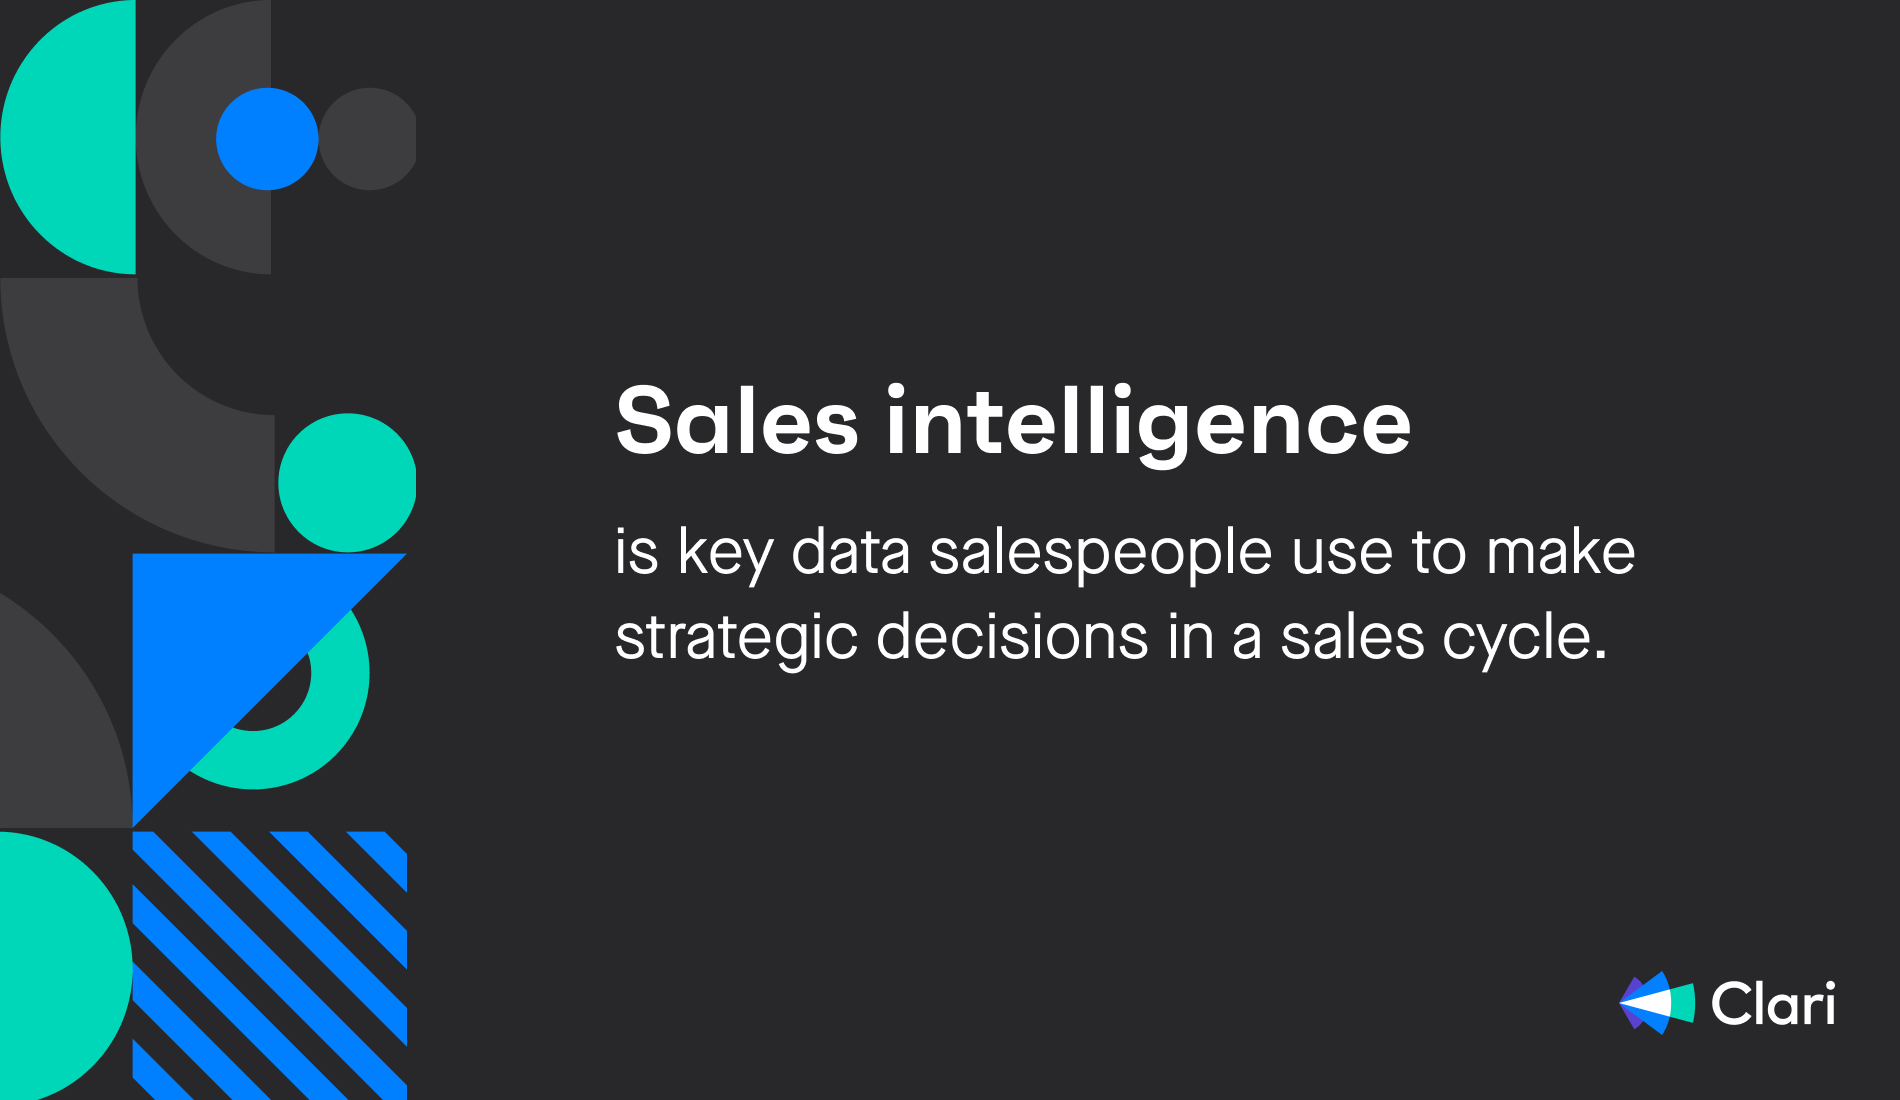 What is sales intelligence?